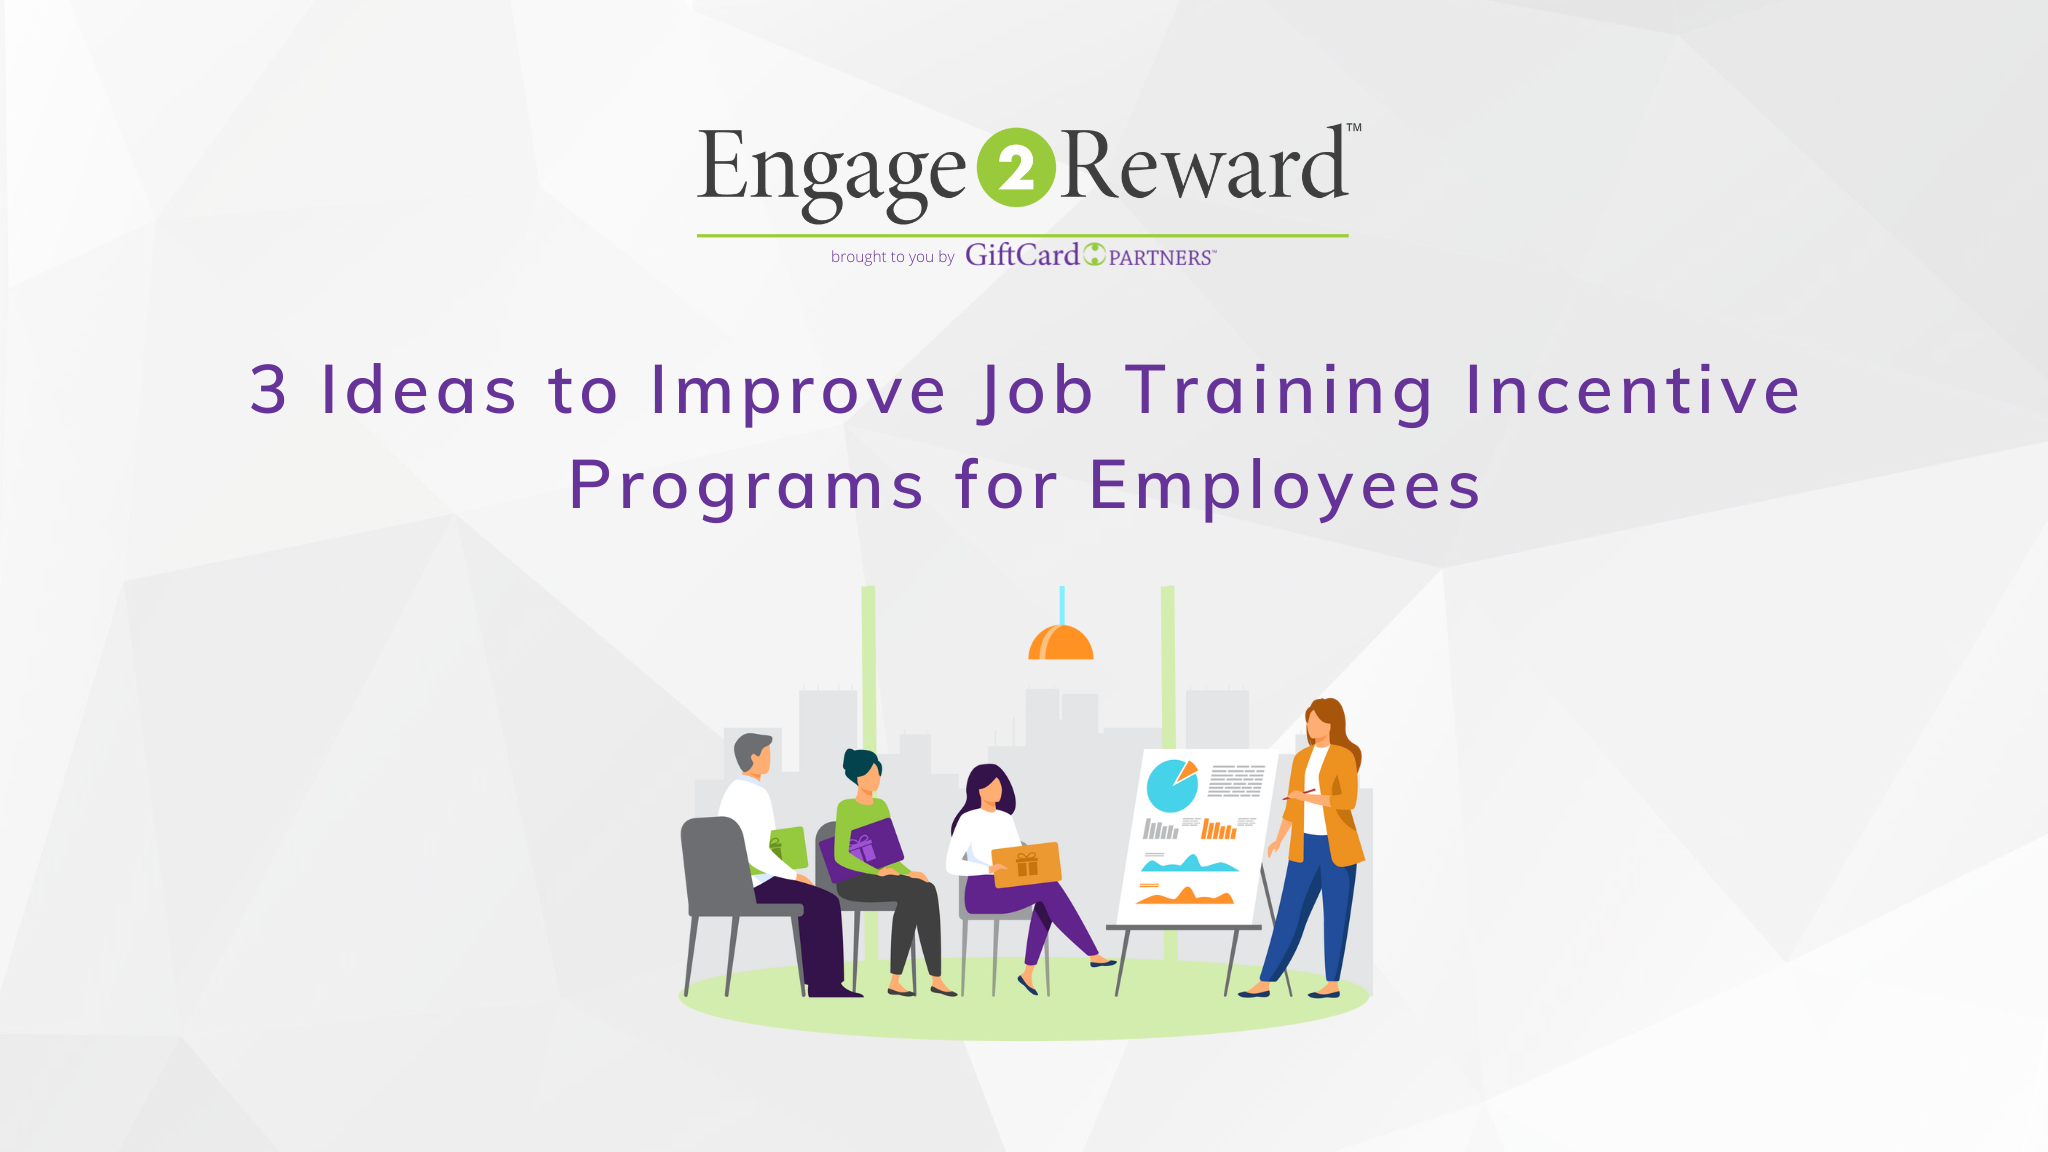 3 Ideas to Improve Job Training Incentive Programs for Employees